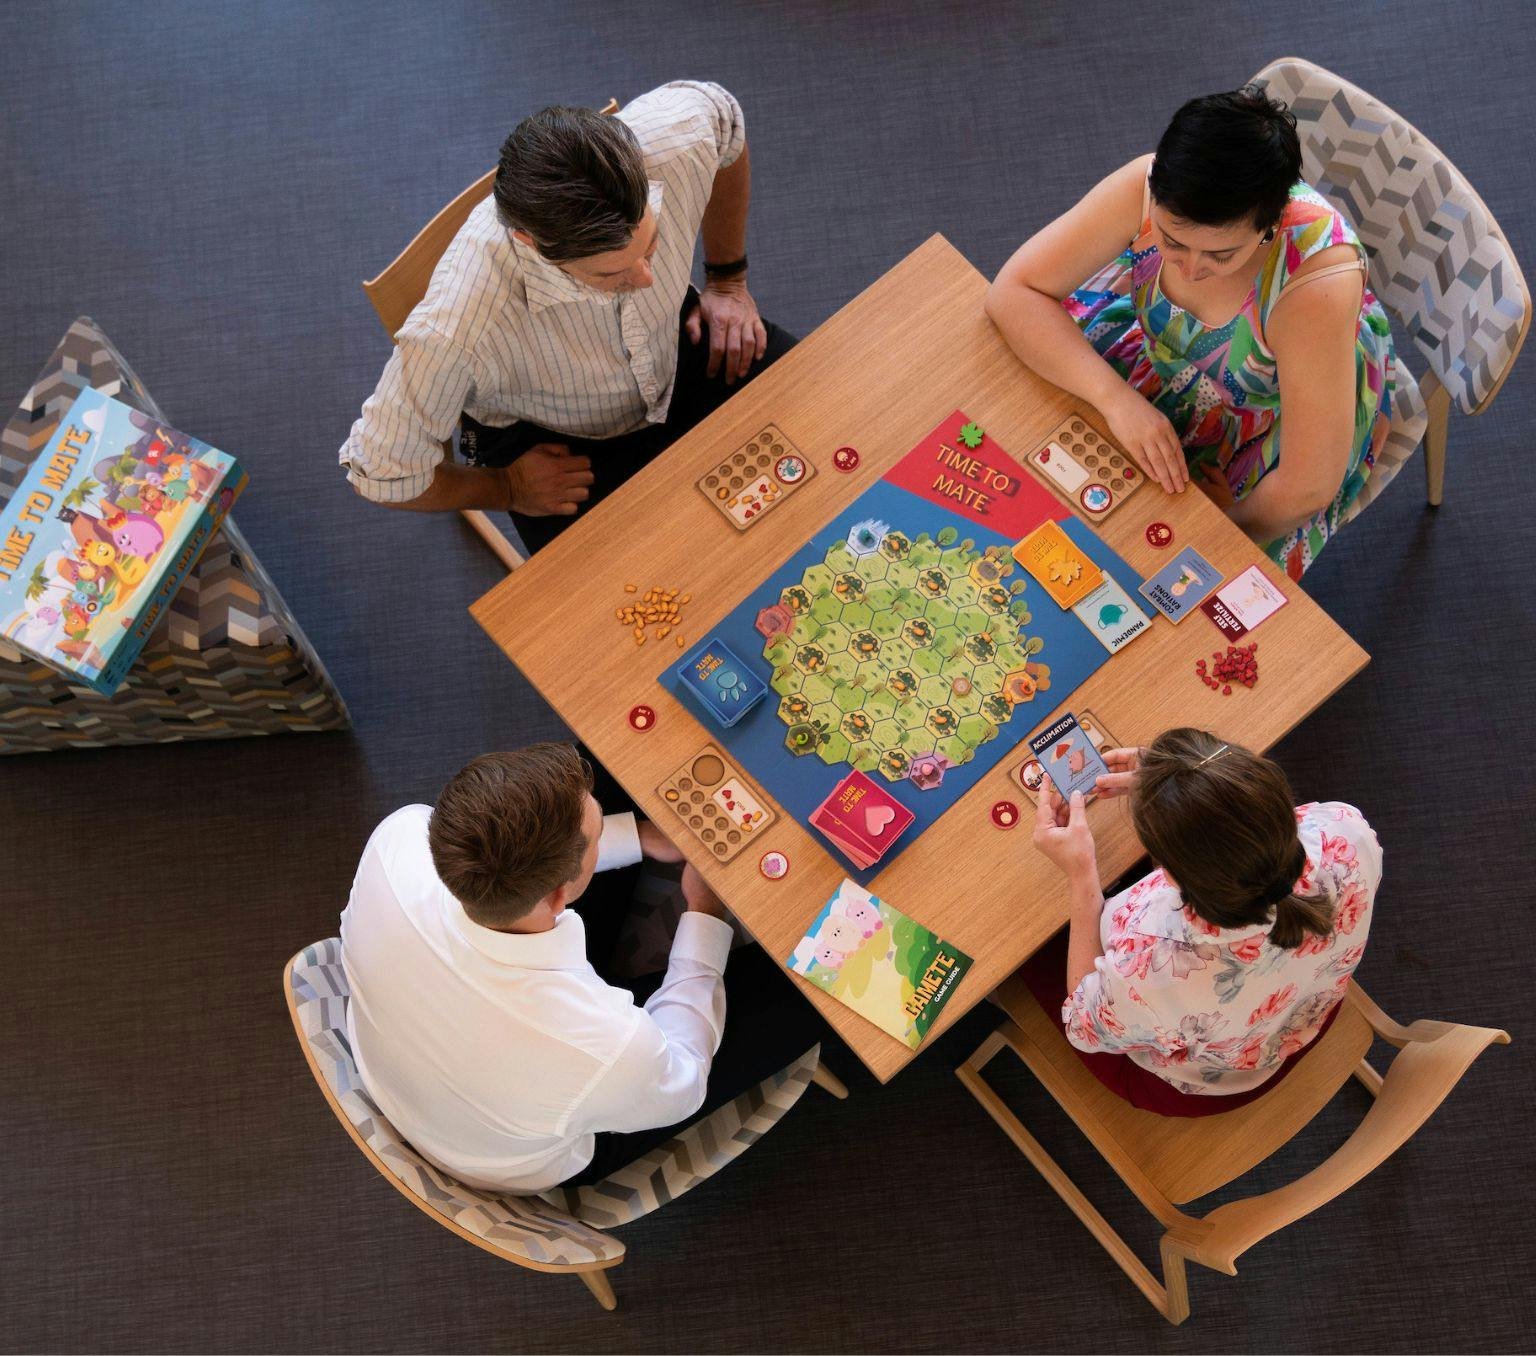 4 people sit around a table playing a board game.